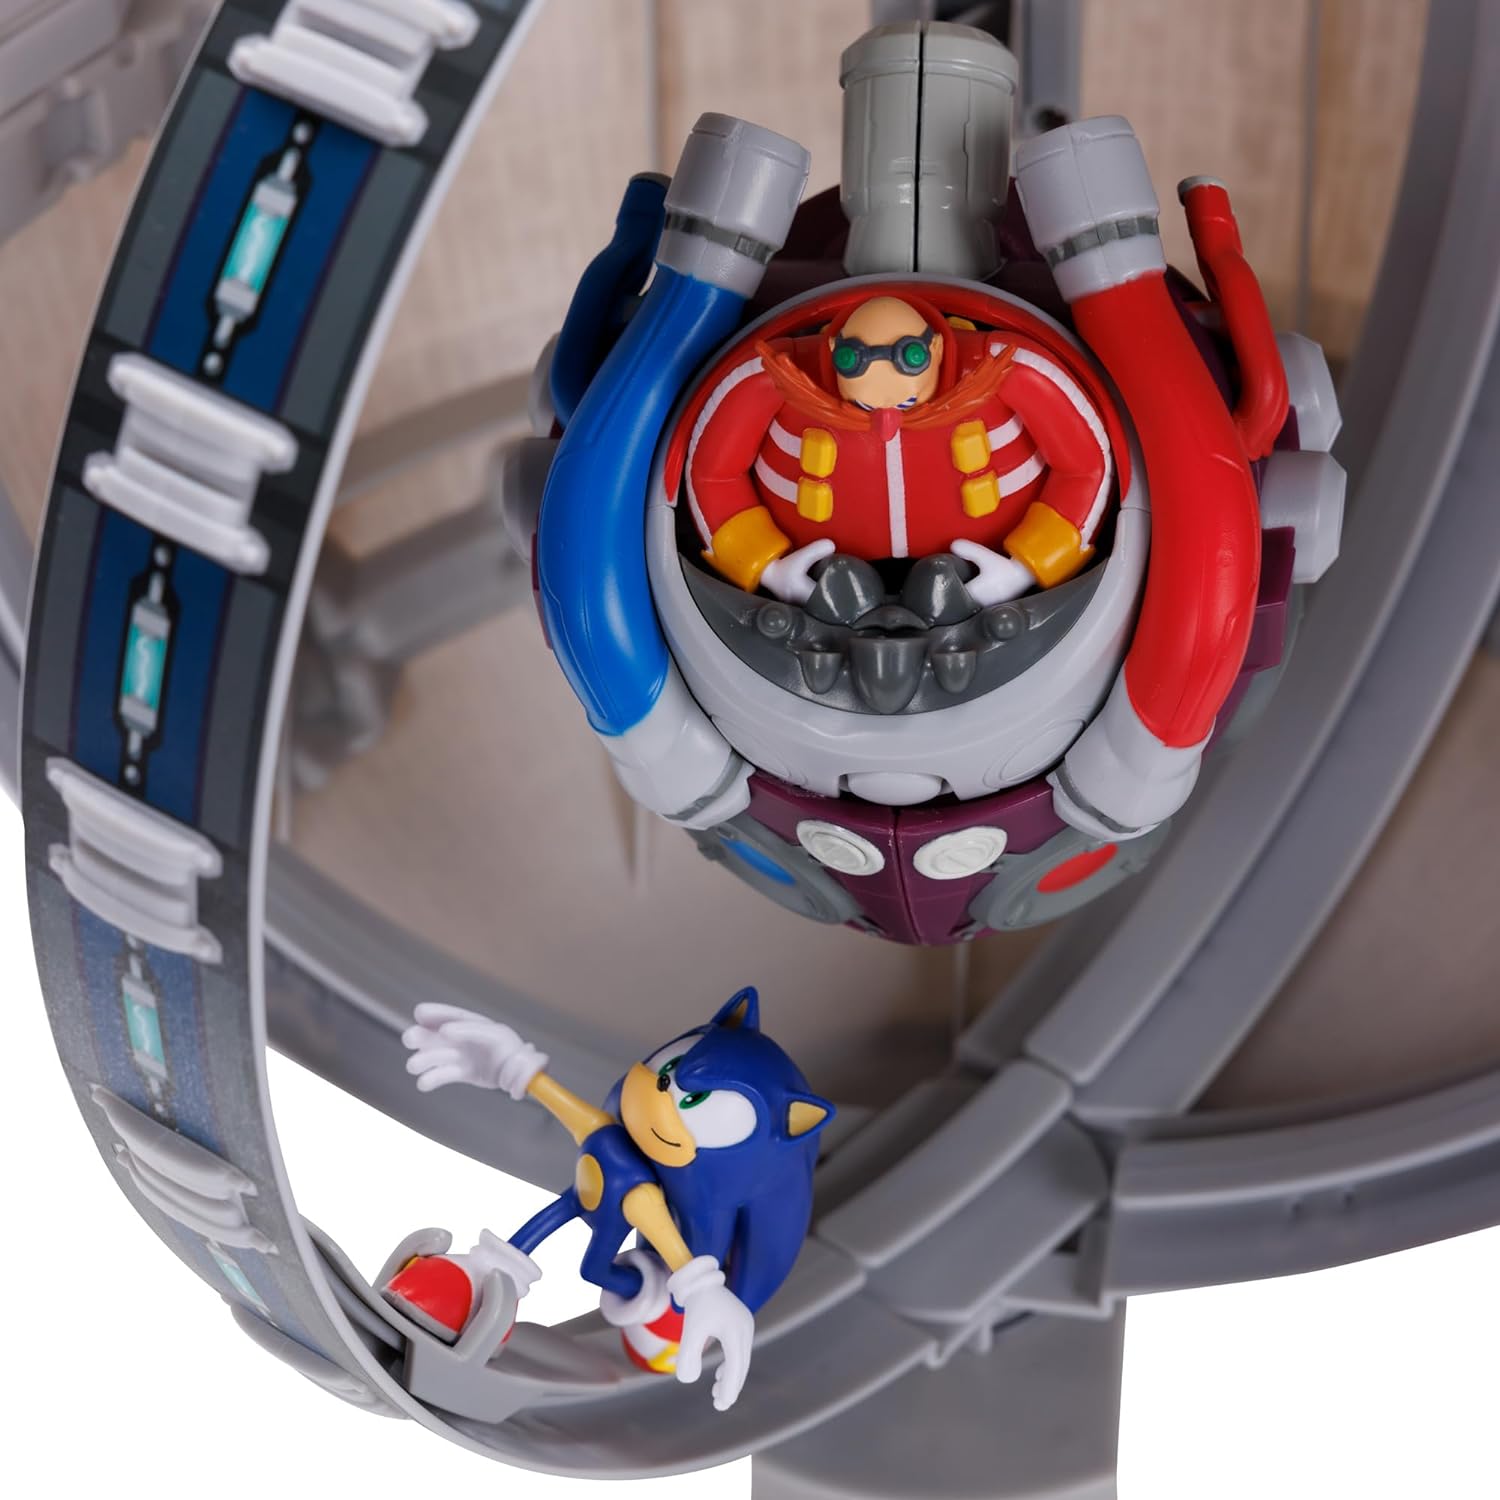 12'' Sonic The Hedgehog Death Egg Playset w/ 2.5'' Song Action Figure $11.98 + Free Shipping w/ Prime